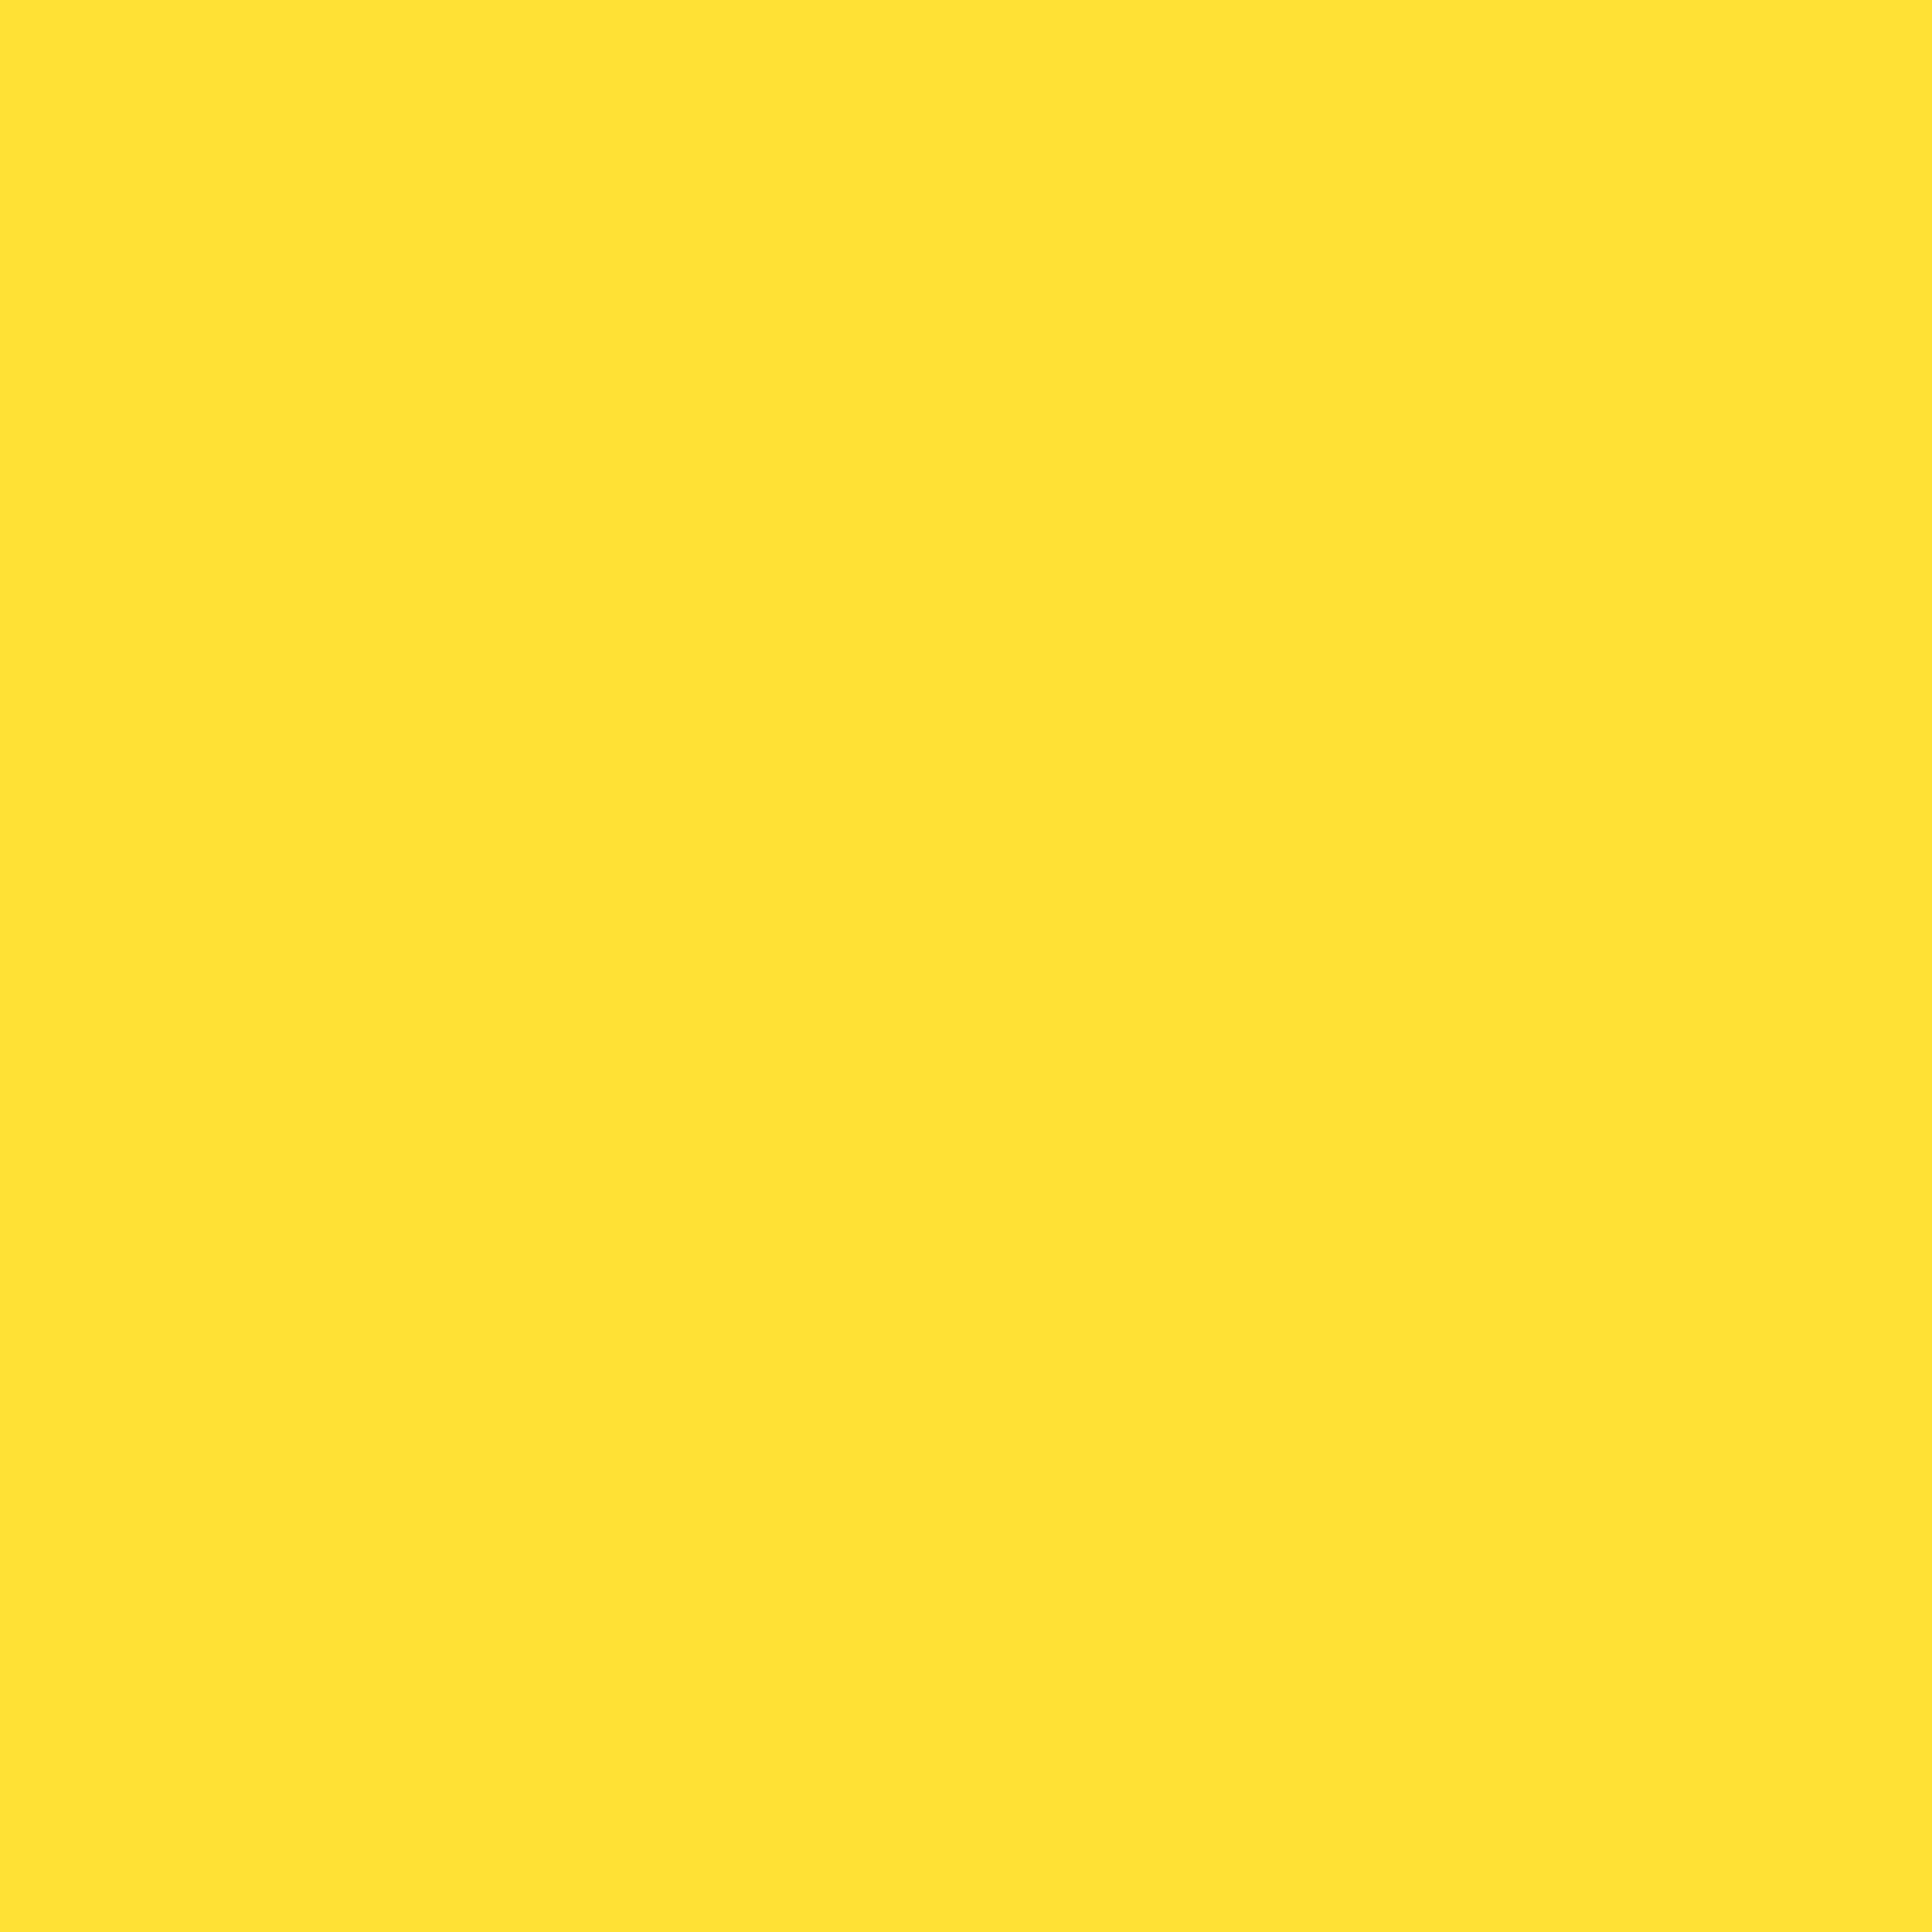 3600x3600 Banana Yellow Solid Color Background